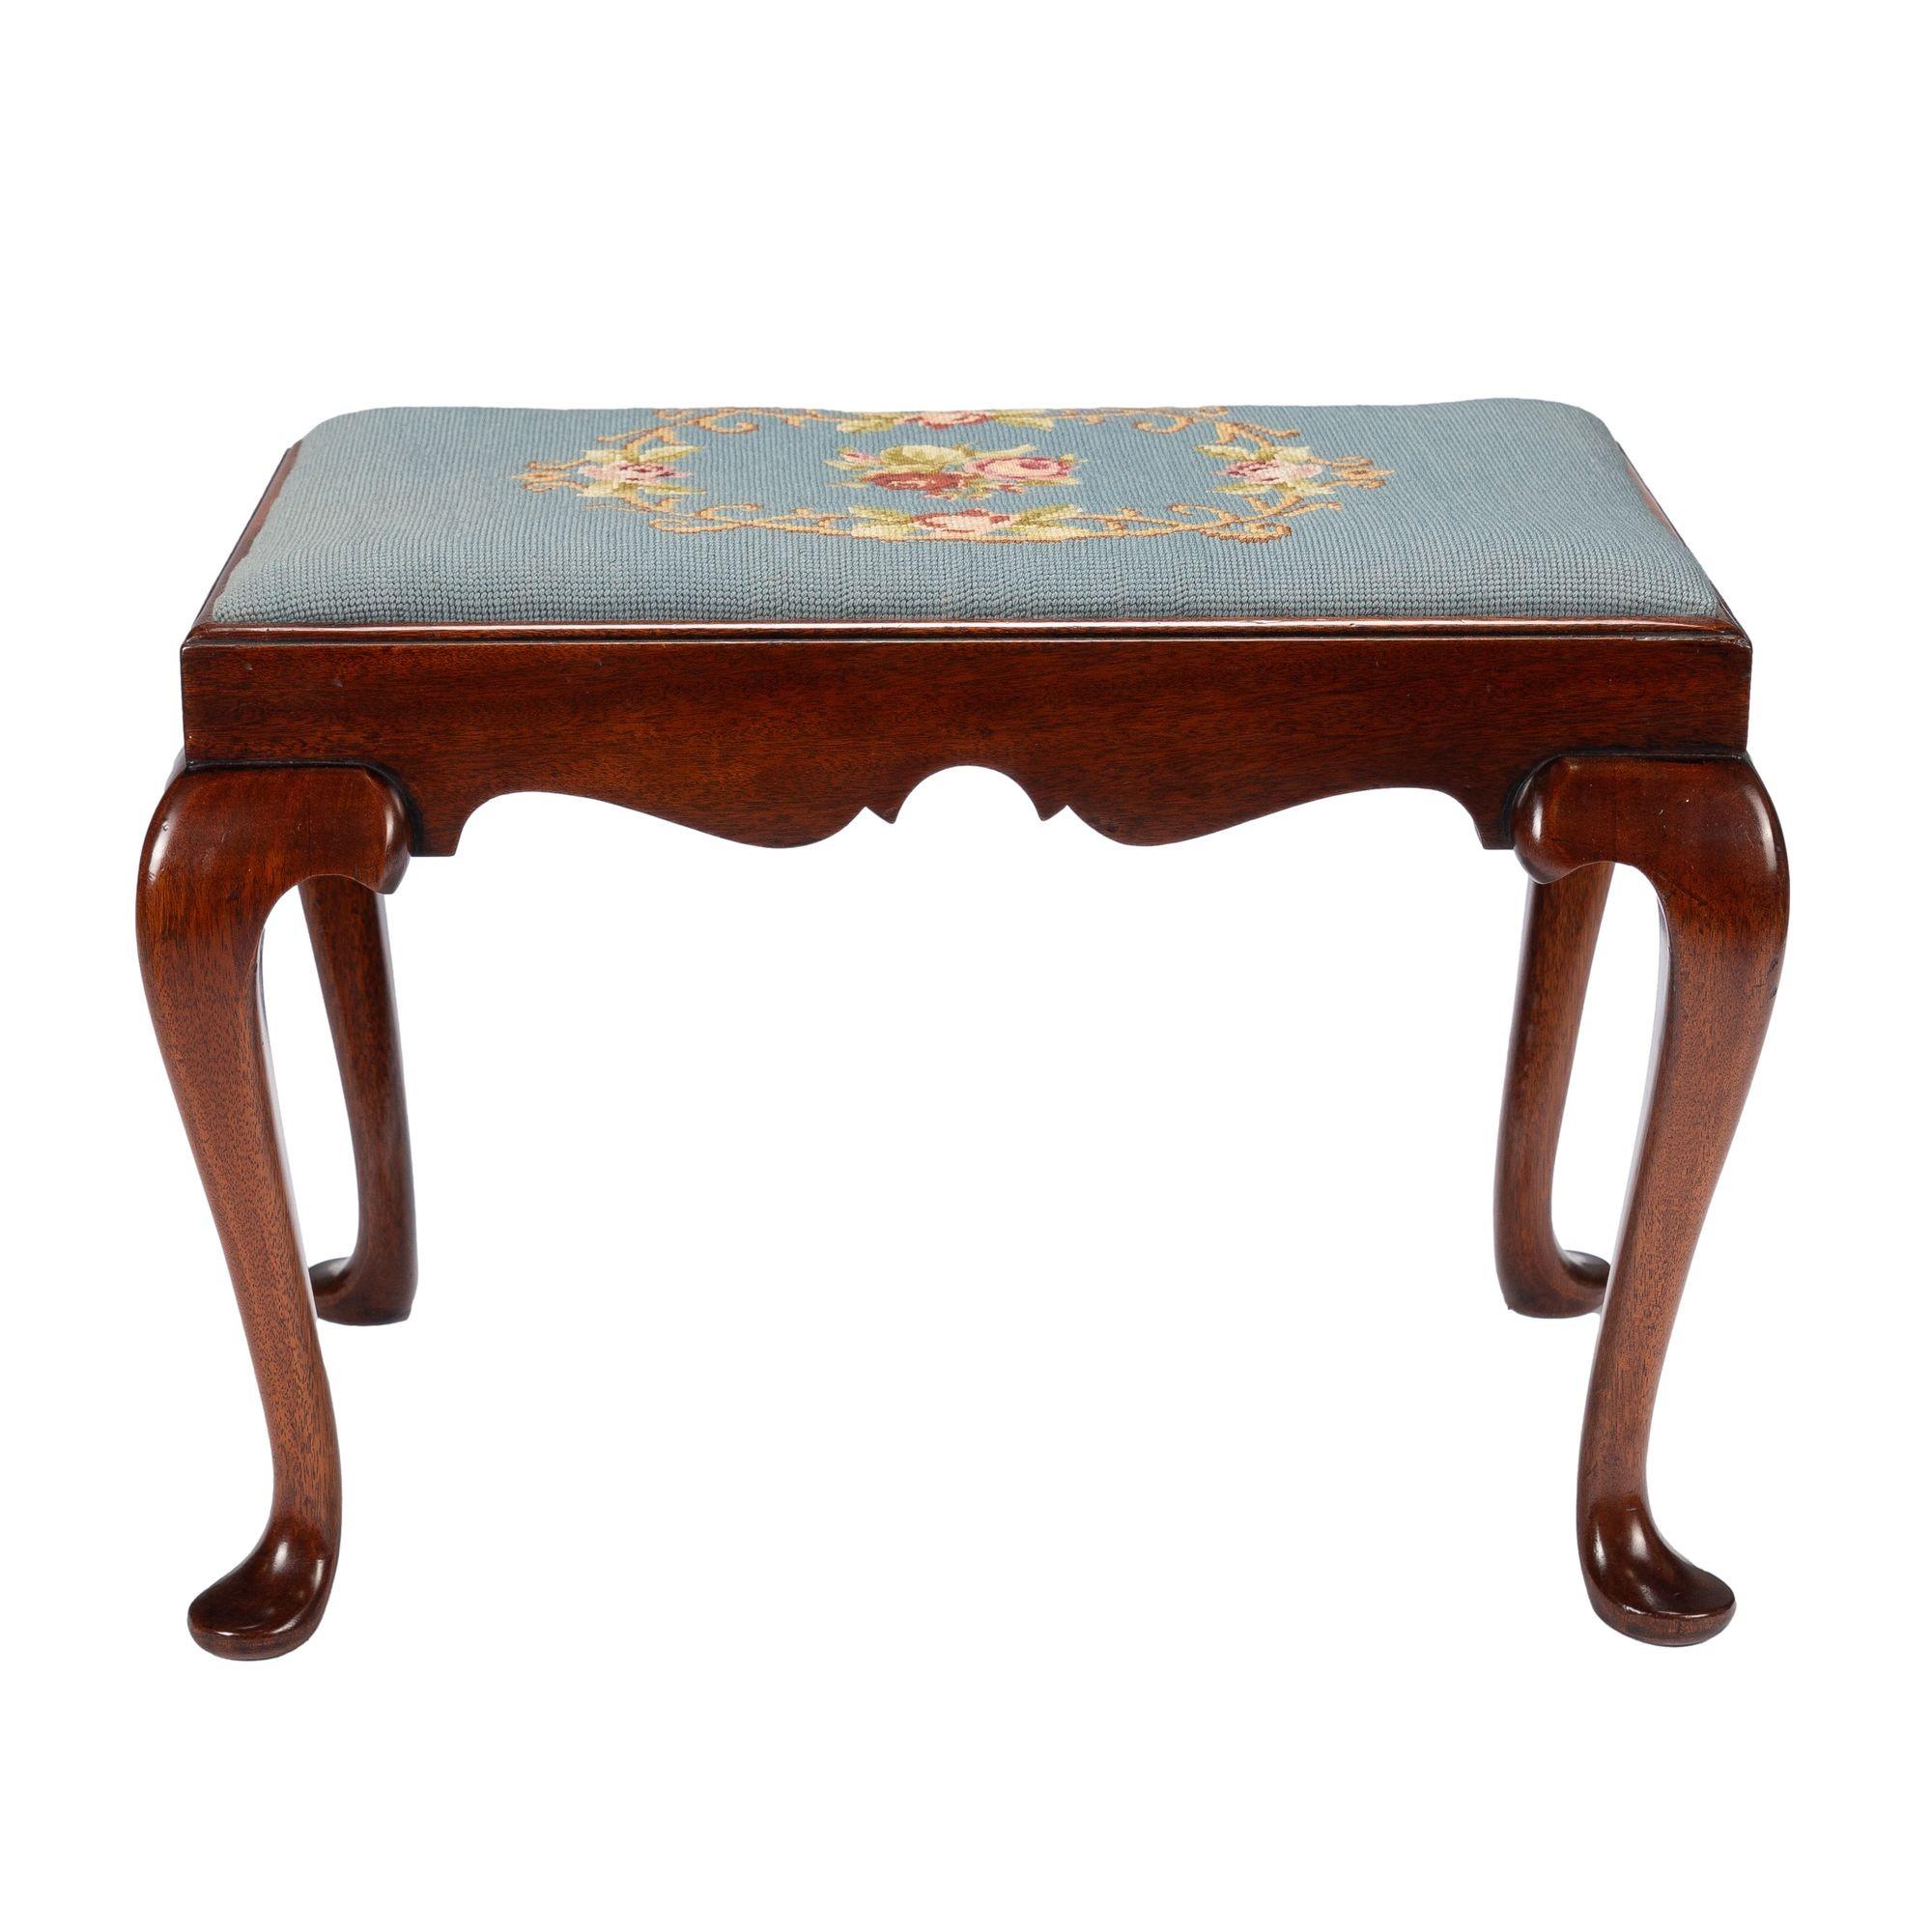 American Queen Anne Style Slip Seat Mahogany Stool, 1900-1950 For Sale 1